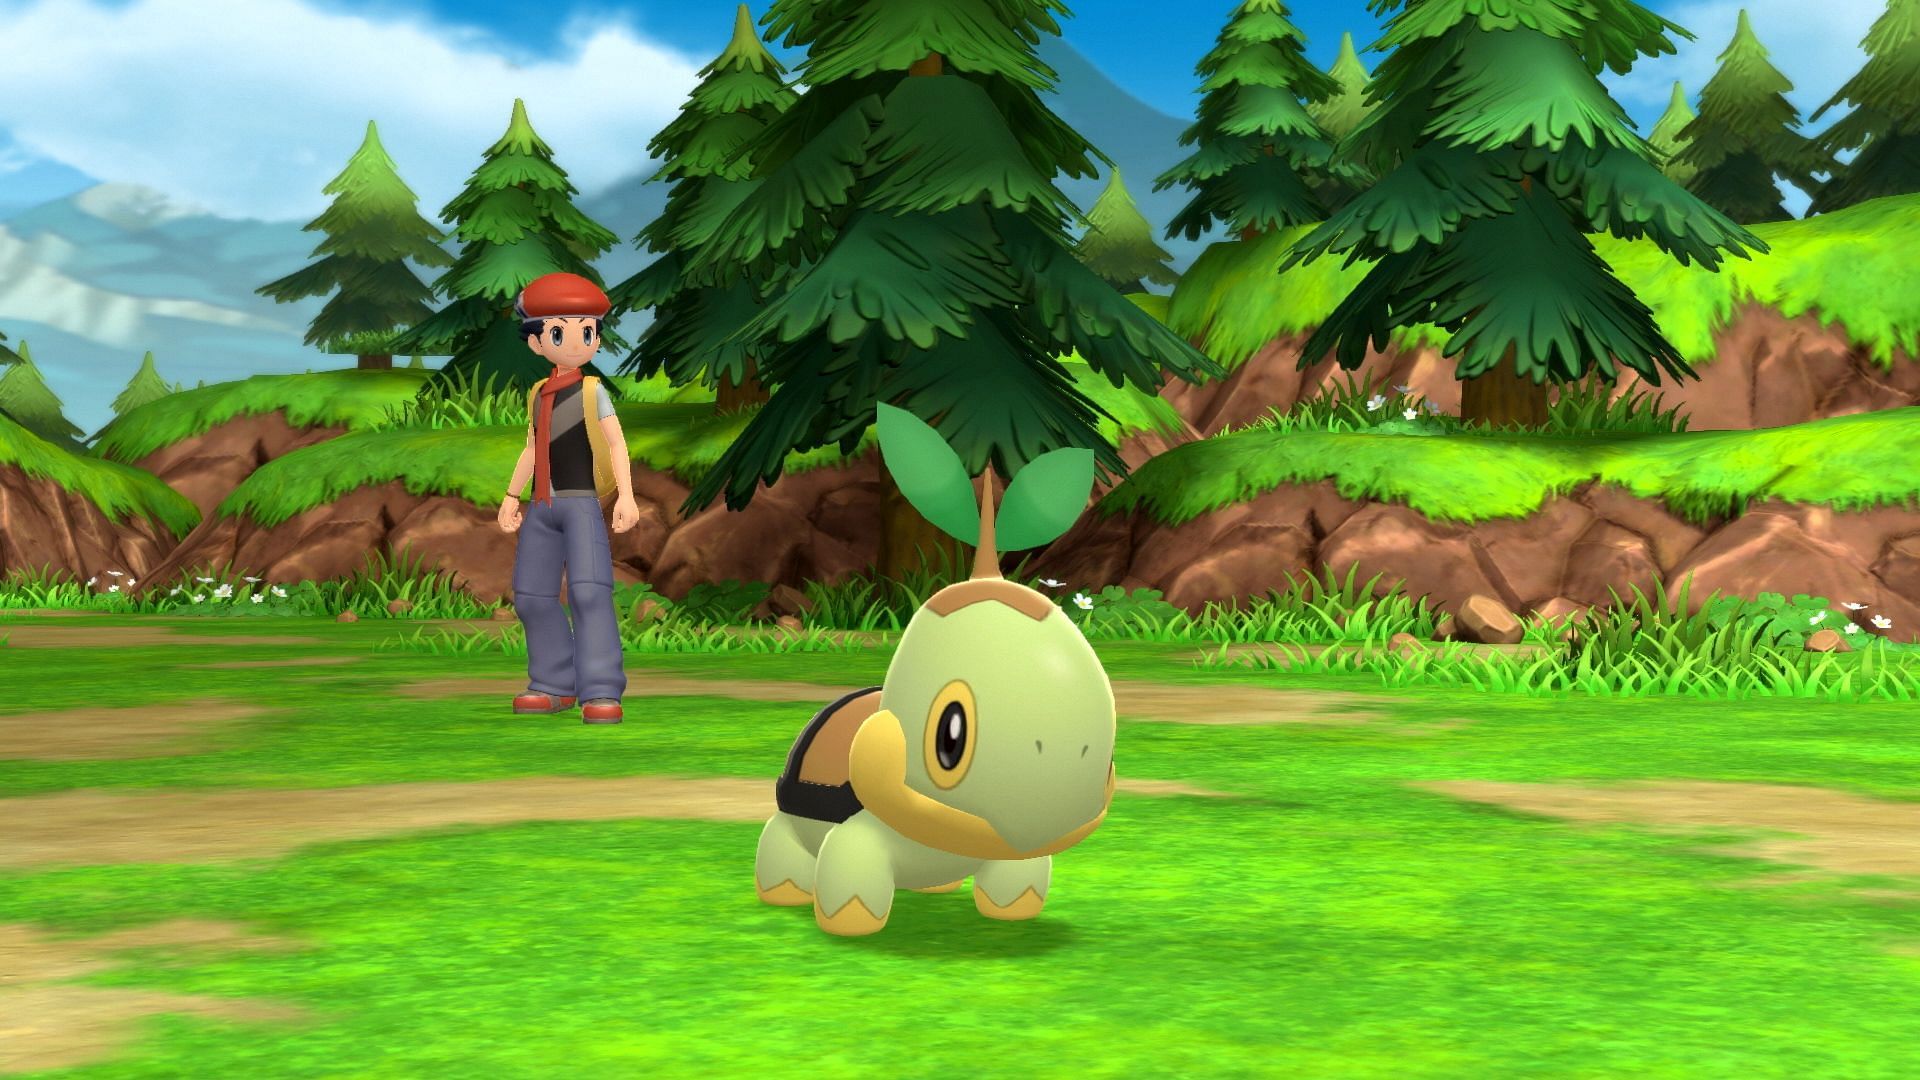 Turtwig is among the members of the Sinnoh Pokedex not included in Sword and Shield (Image via The Pokemon Company)